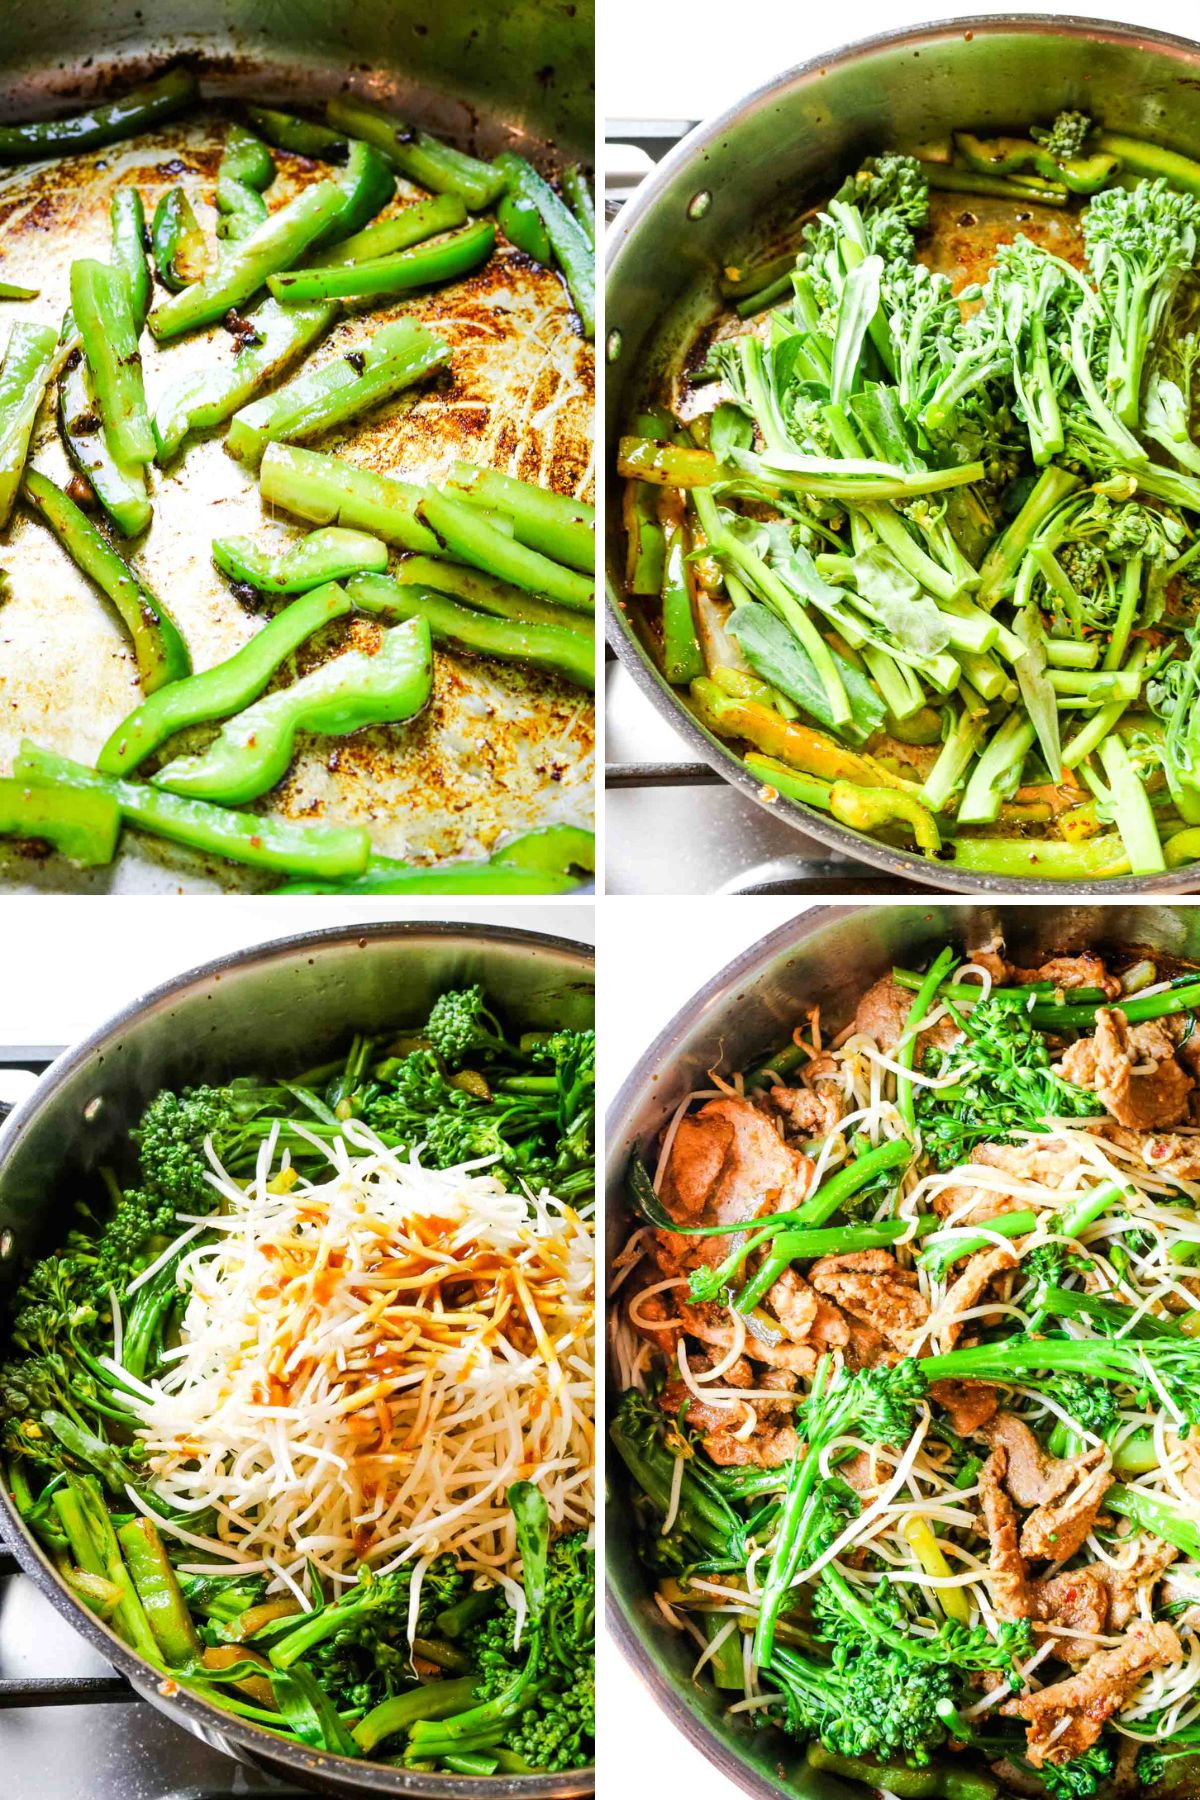 collage of 4 photos cooking bell peppers, broccoli, mung bean sprouts, and cooked pork added.